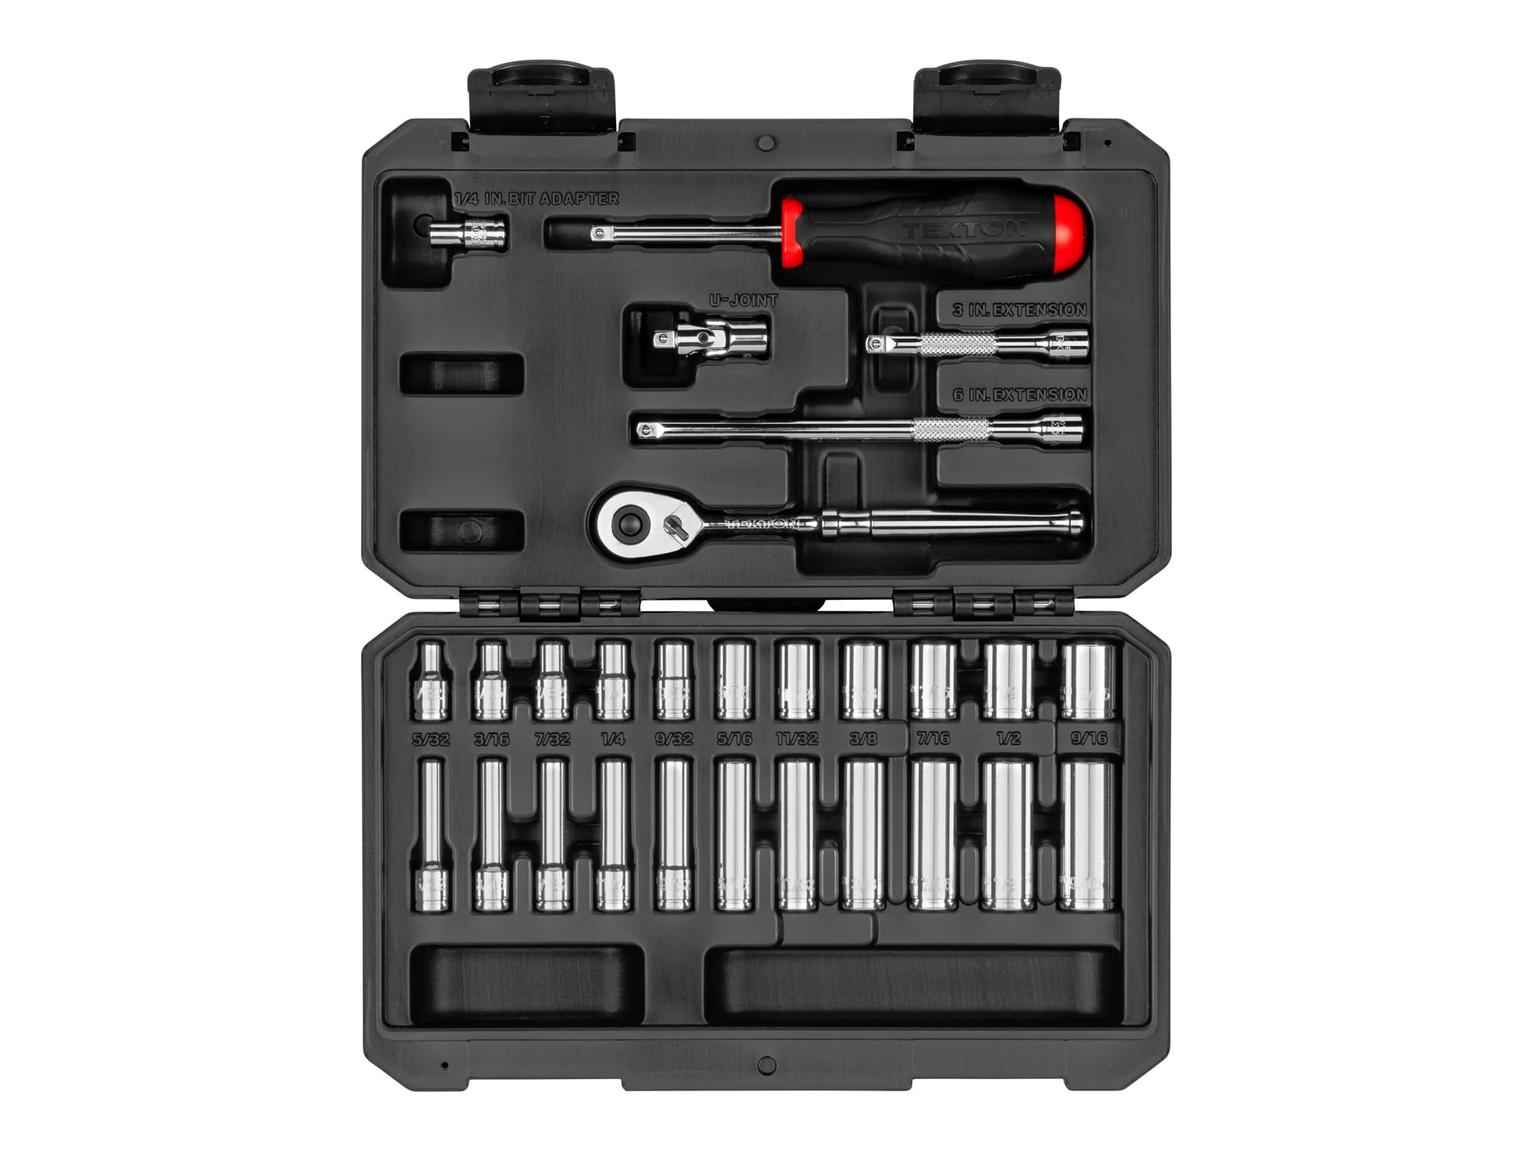 TEKTON SKT05102-D 1/4 Inch Drive 6-Point Socket and Ratchet Set, 28-Piece (5/32-9/16 in.)